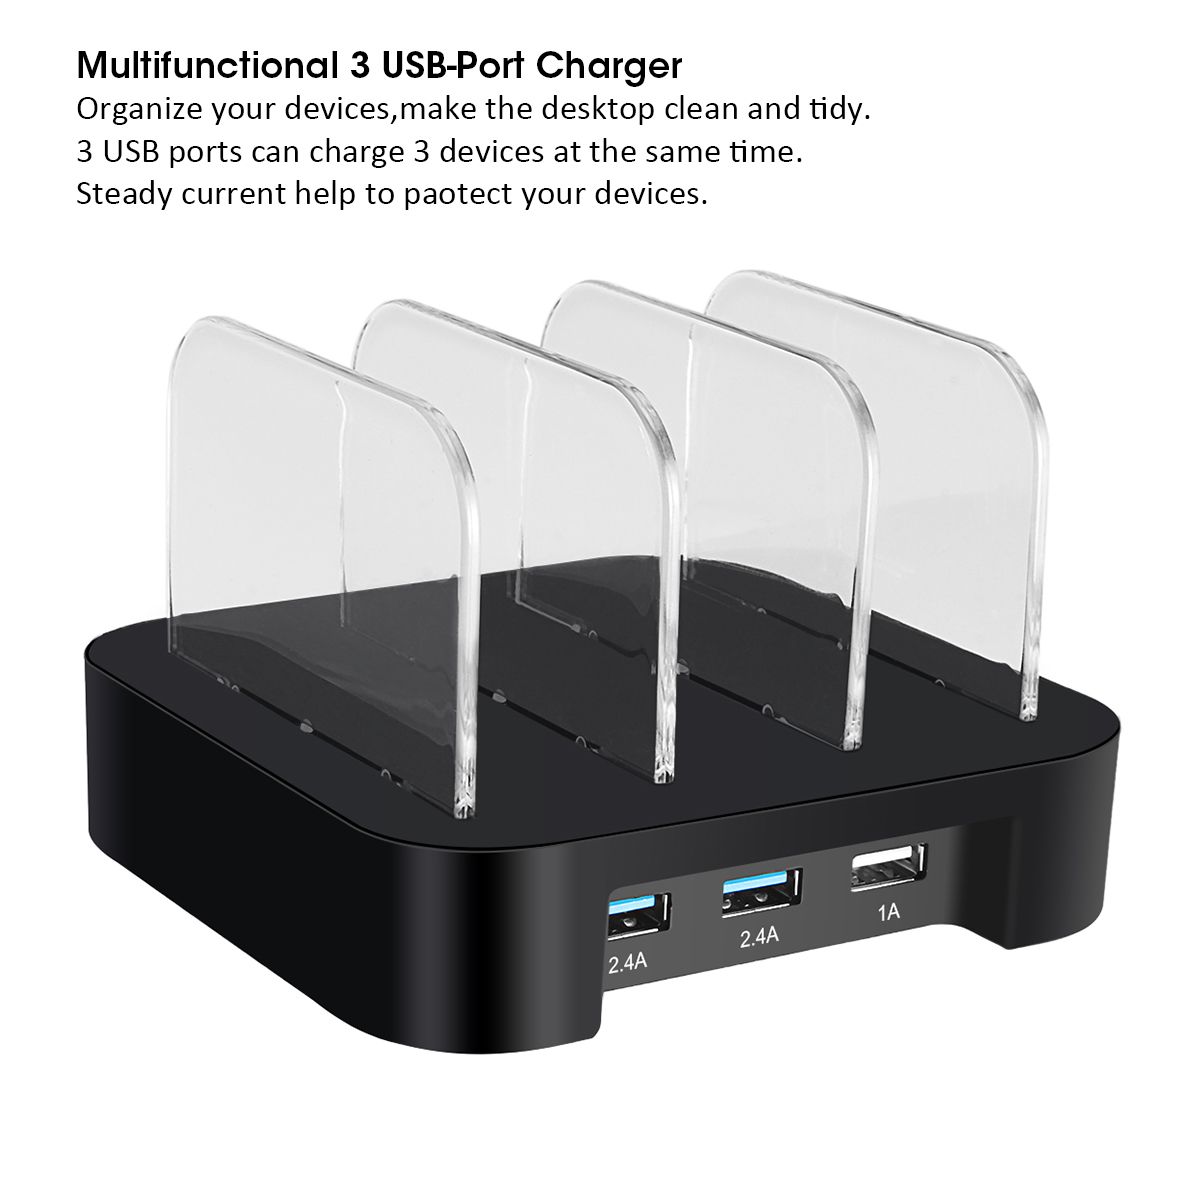 Multifunctional-3-USB-Port-Universal-Smart-Charger-Charging-Dock-for-Mobile-Phone-1127937